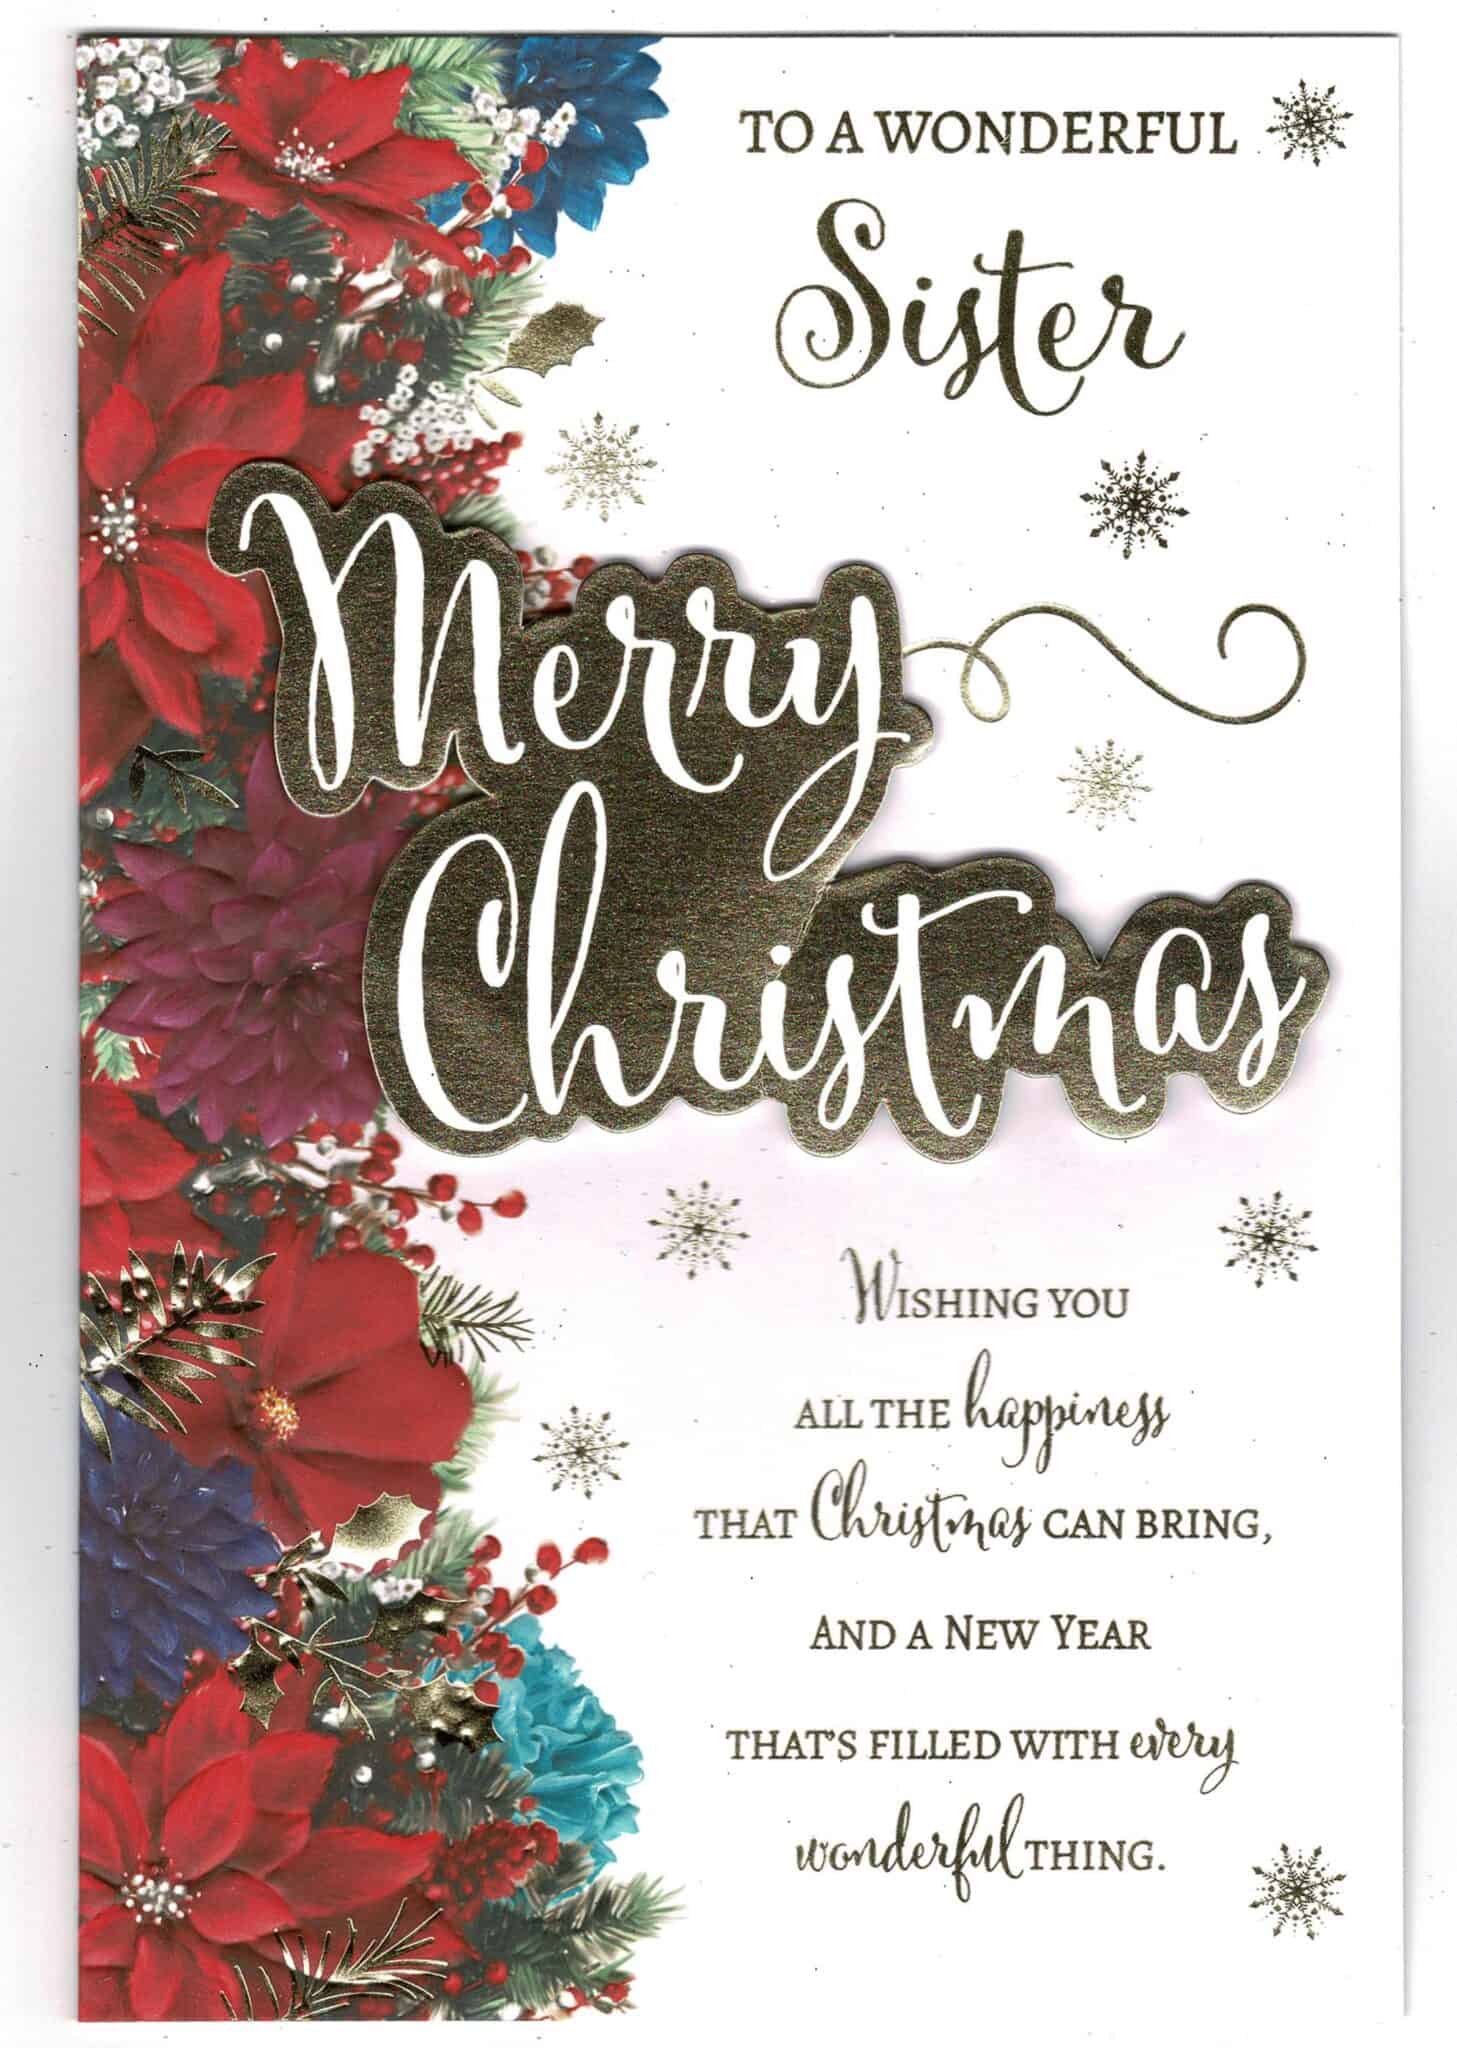 sister-christmas-card-to-a-wonderful-sister-merry-christmas-with